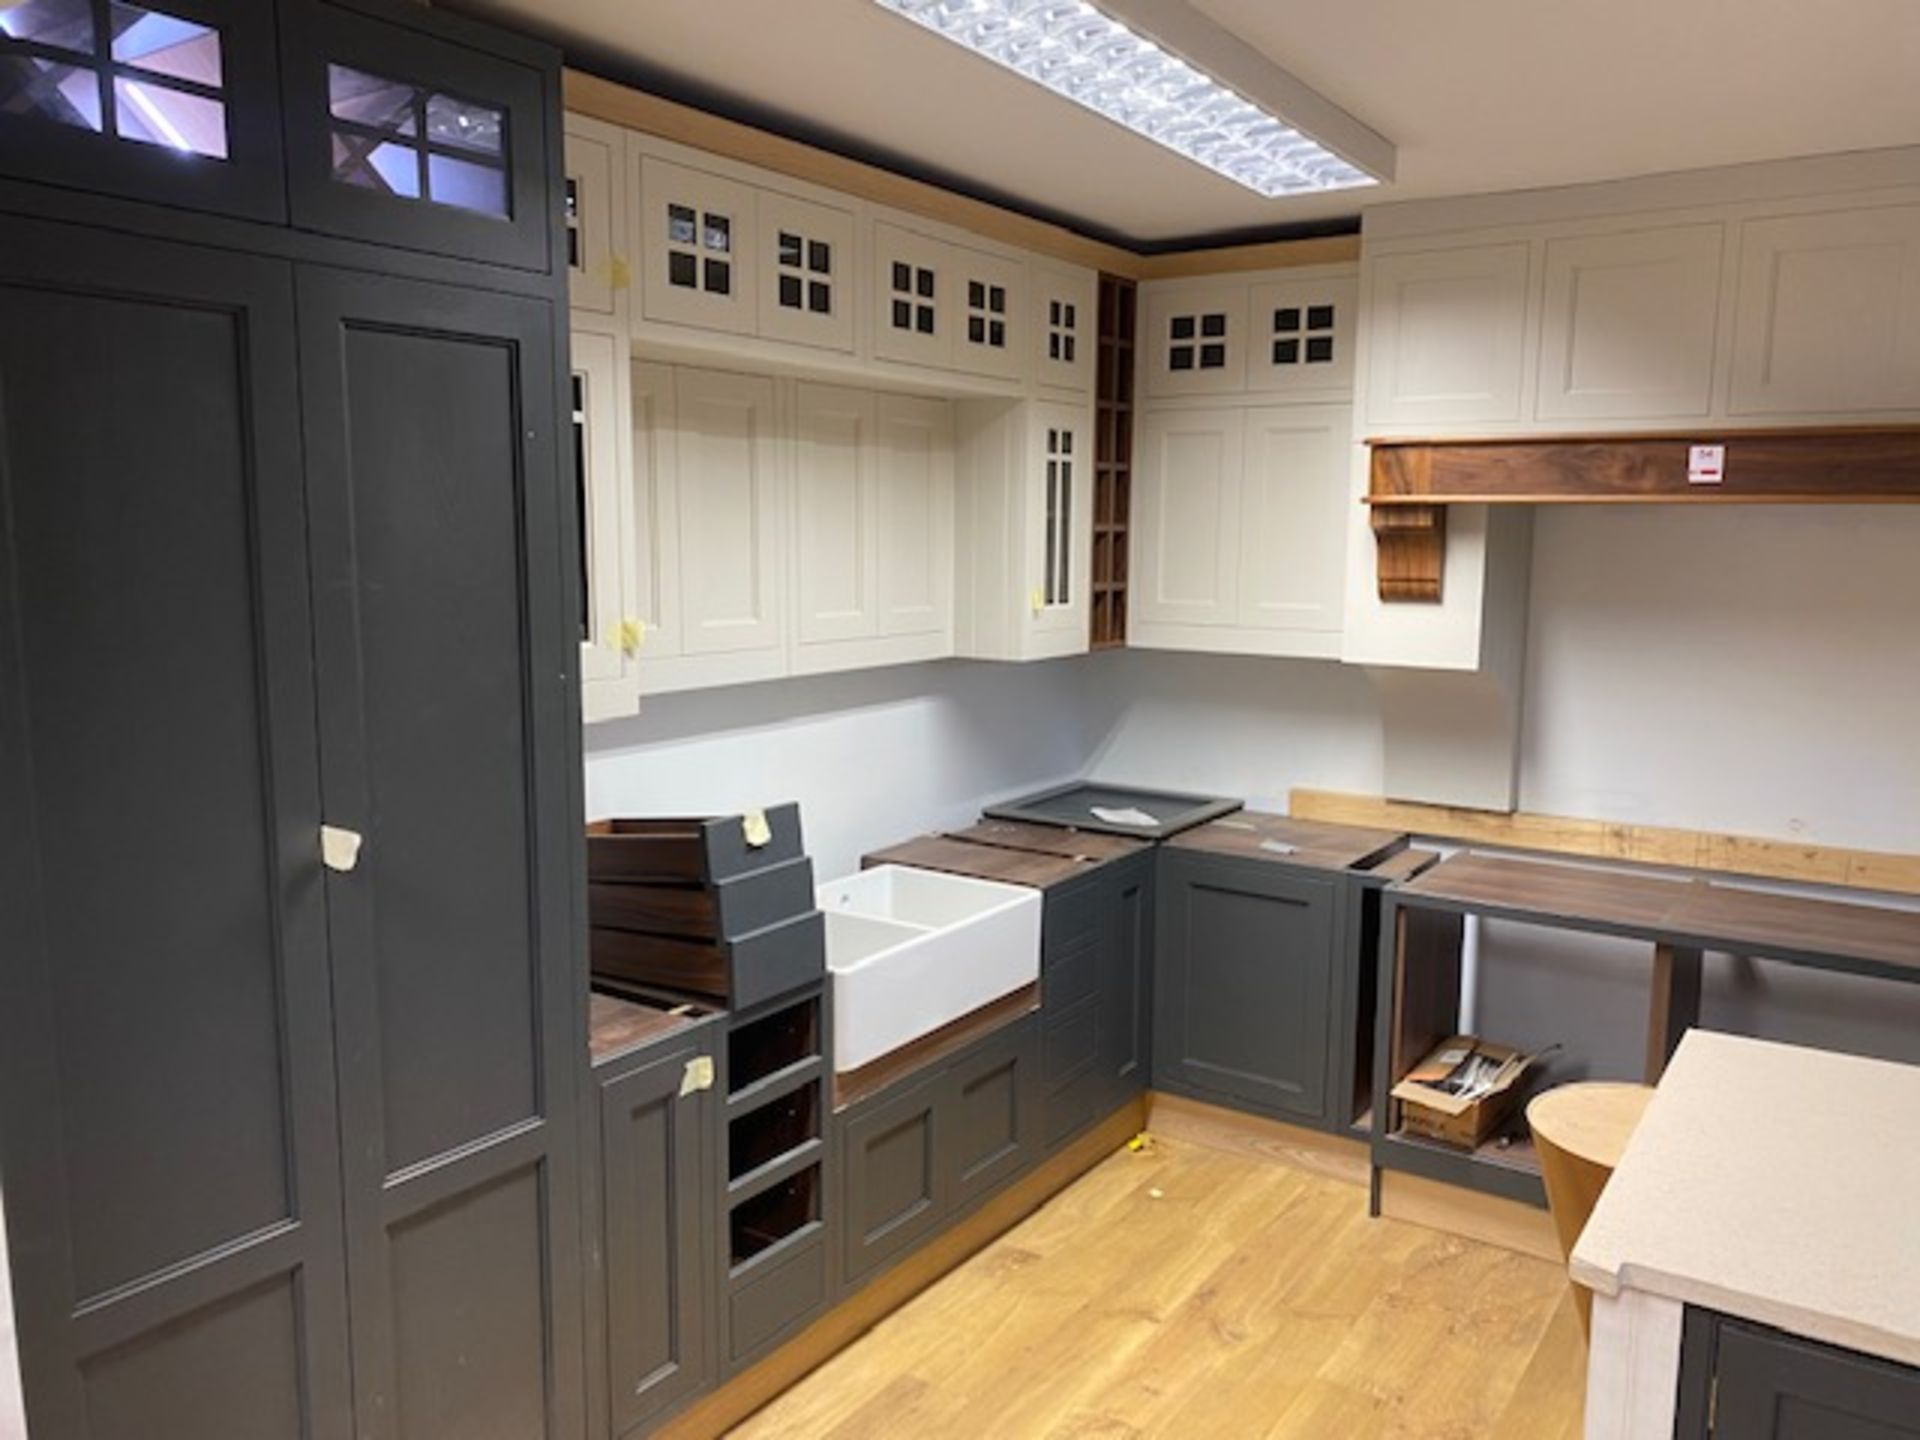 Part built display kitchen (as lotted, please note that appliances are not included)